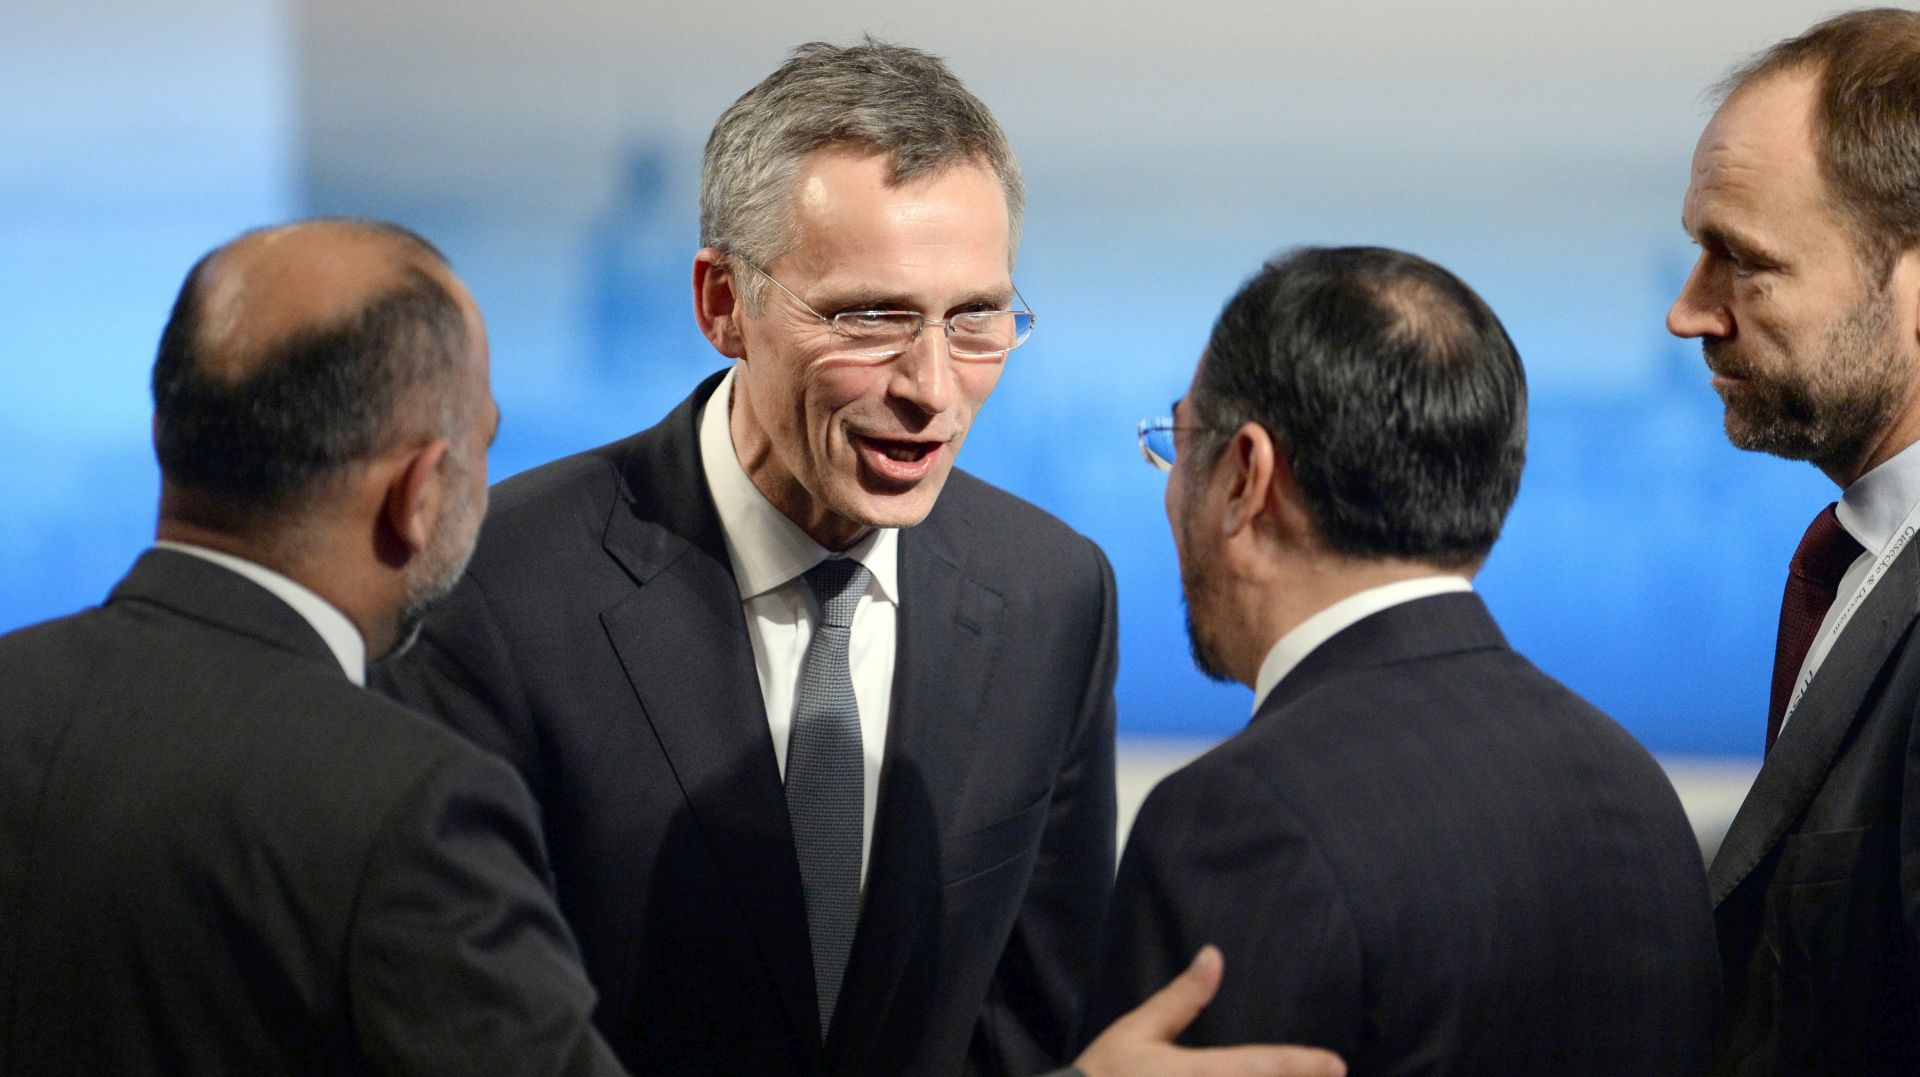 epa05156545 The NATO Secretary General Jens Stoltenberg (2-L) welcomes conference participants to the 52nd Security Conference in Munich, Germany, 12 February 2016. The 52nd Security Conference, where foreign policy and defence experts are meeting to discuss global crises continues until 14 February 2016.  EPA/ANDREAS GEBERT